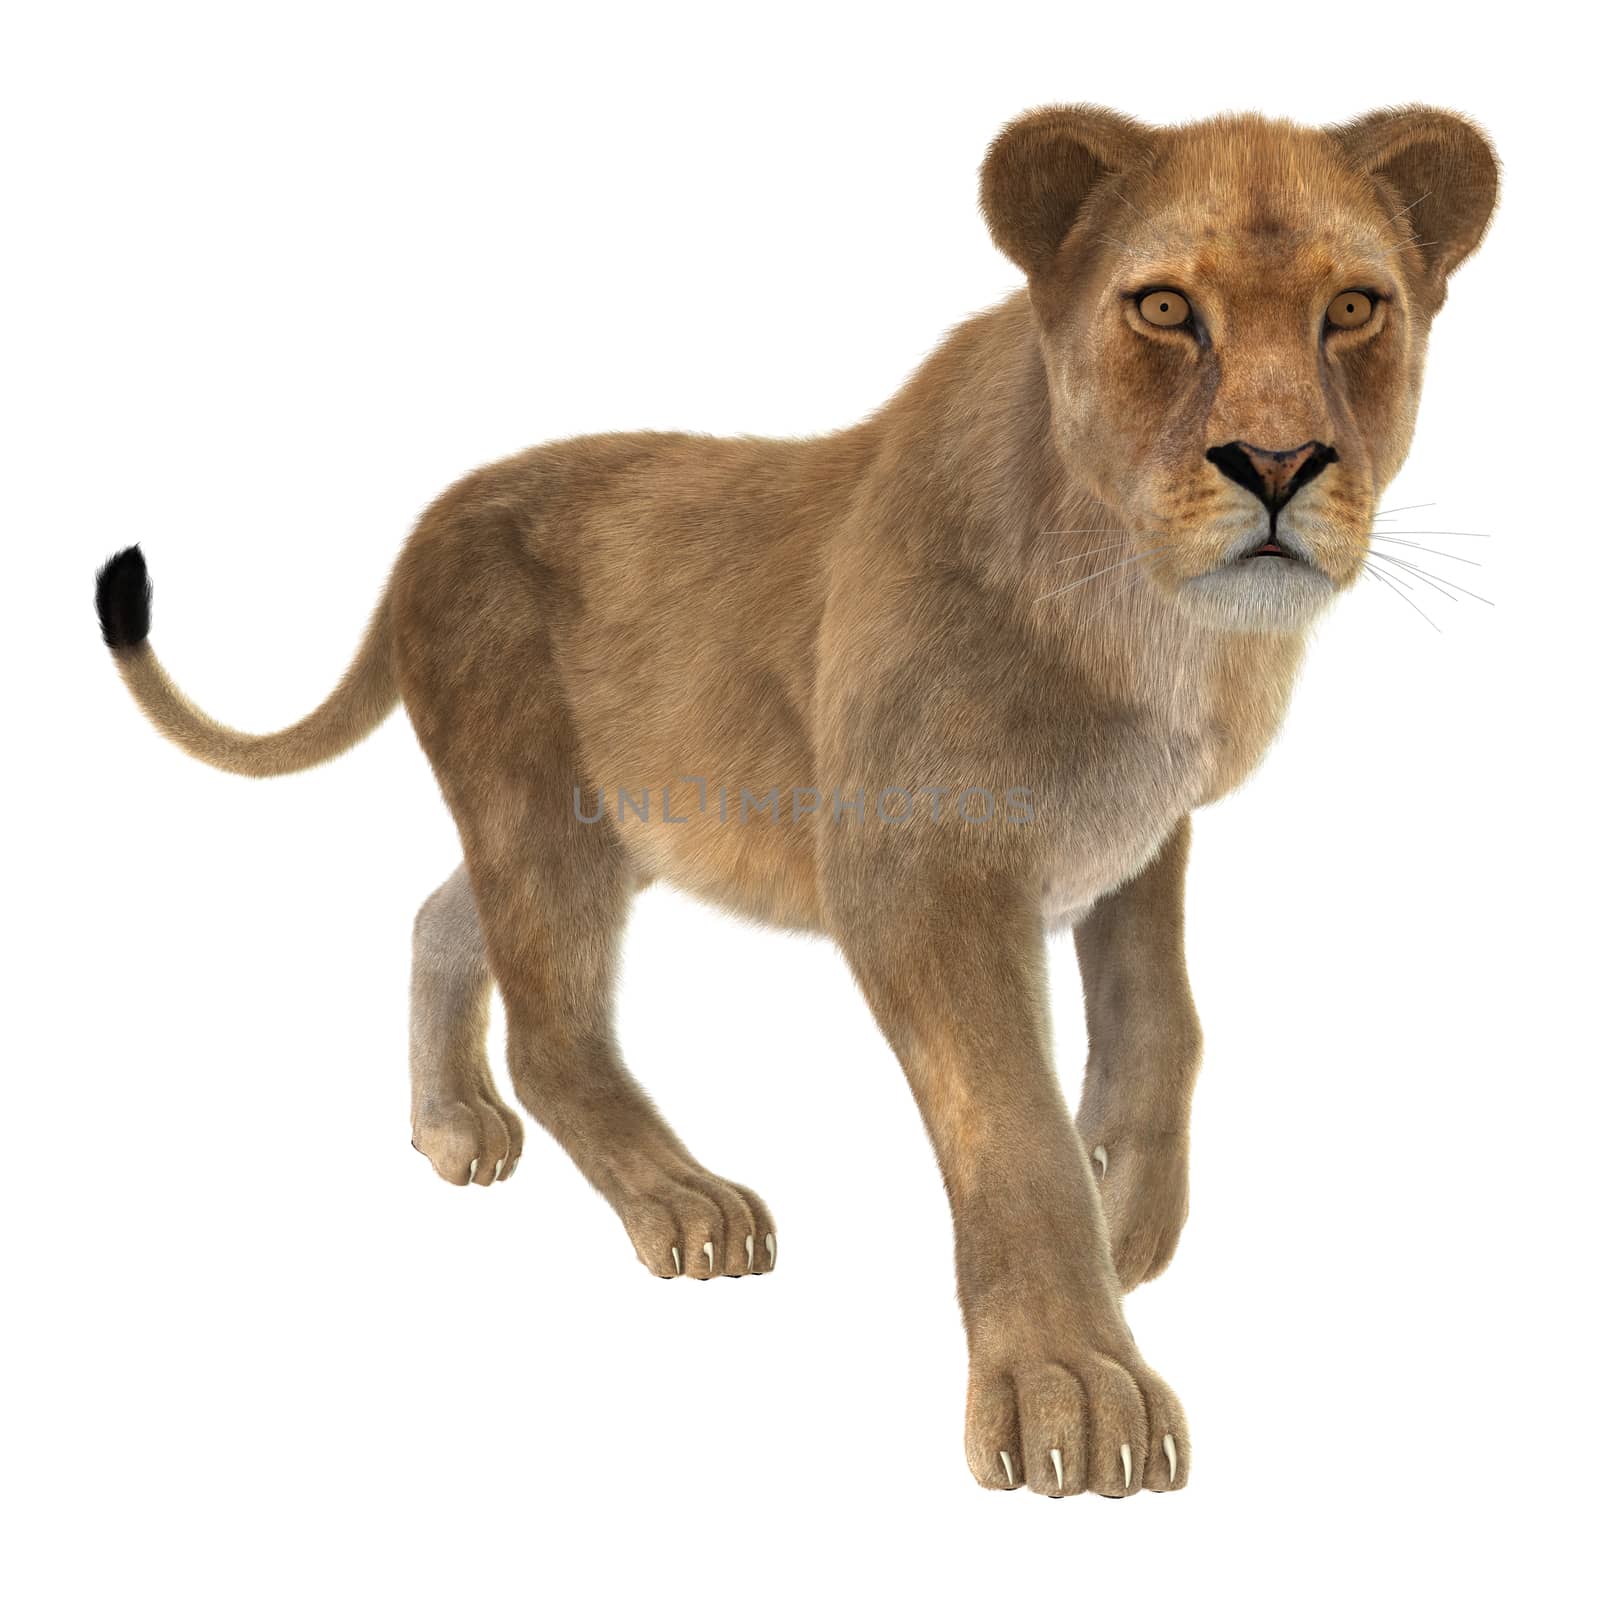 3D digital render of a female lion isolated on white background